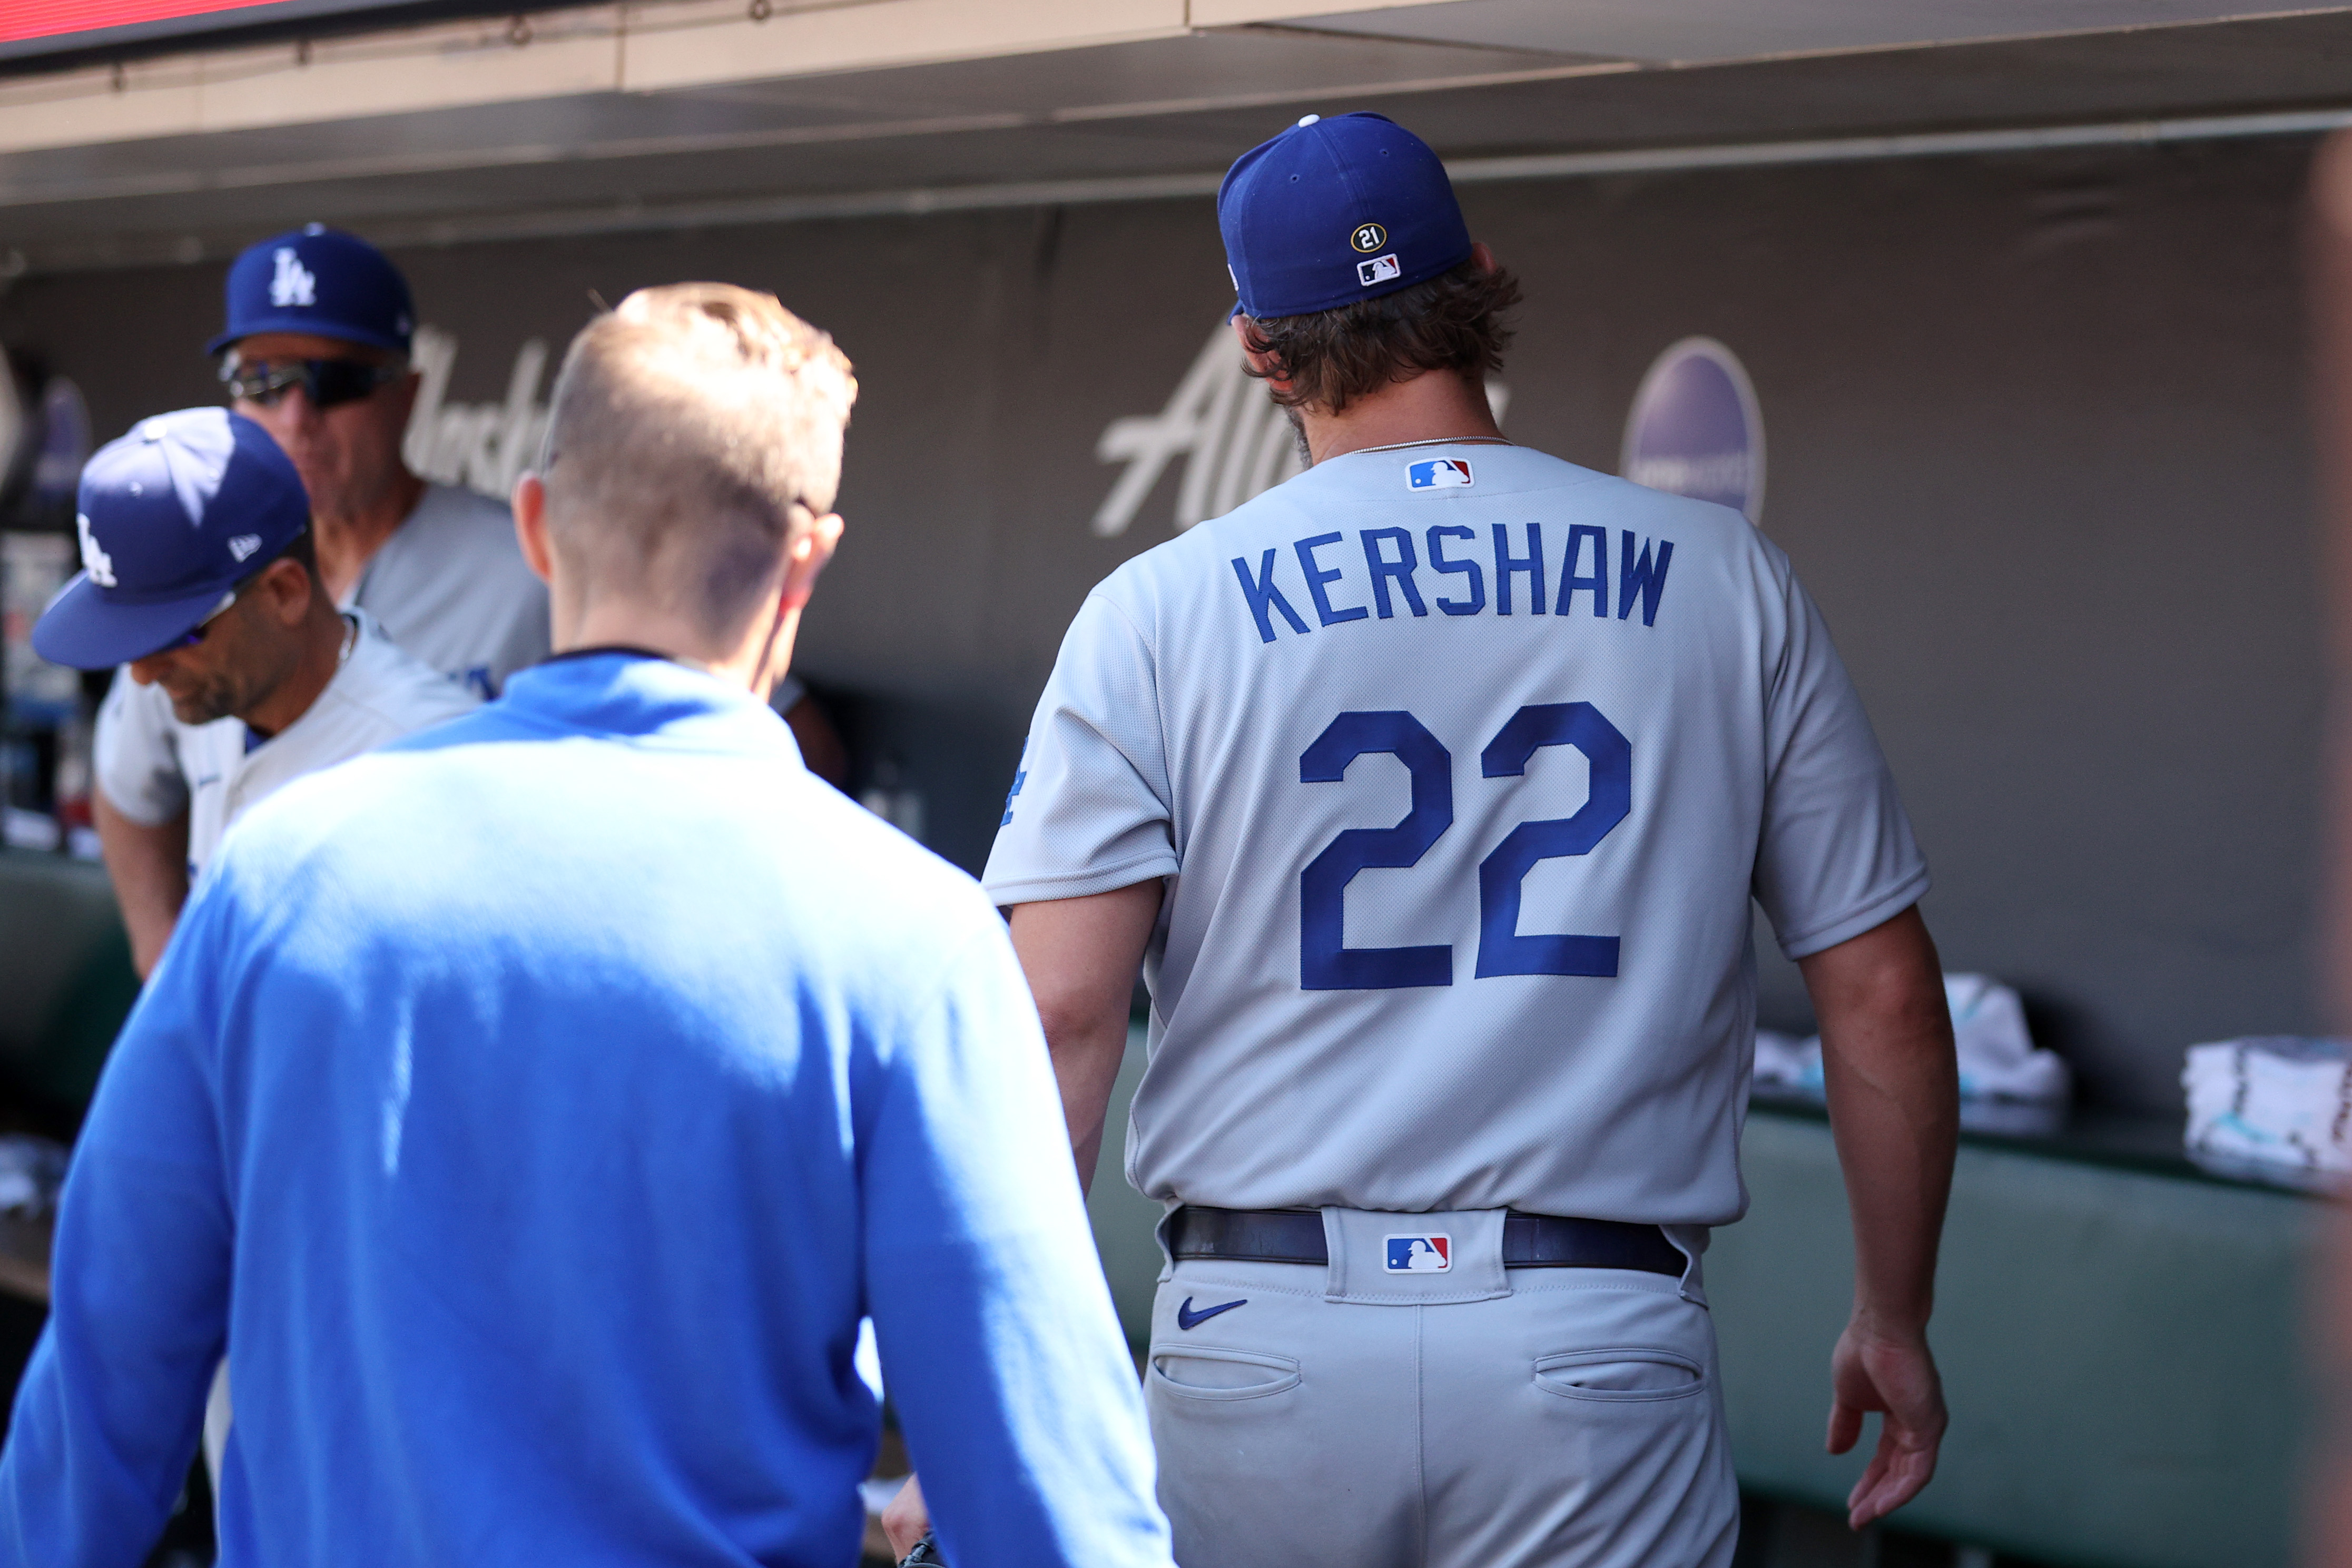 Clayton Kershaw loses for first time since May 21 as Giants beat